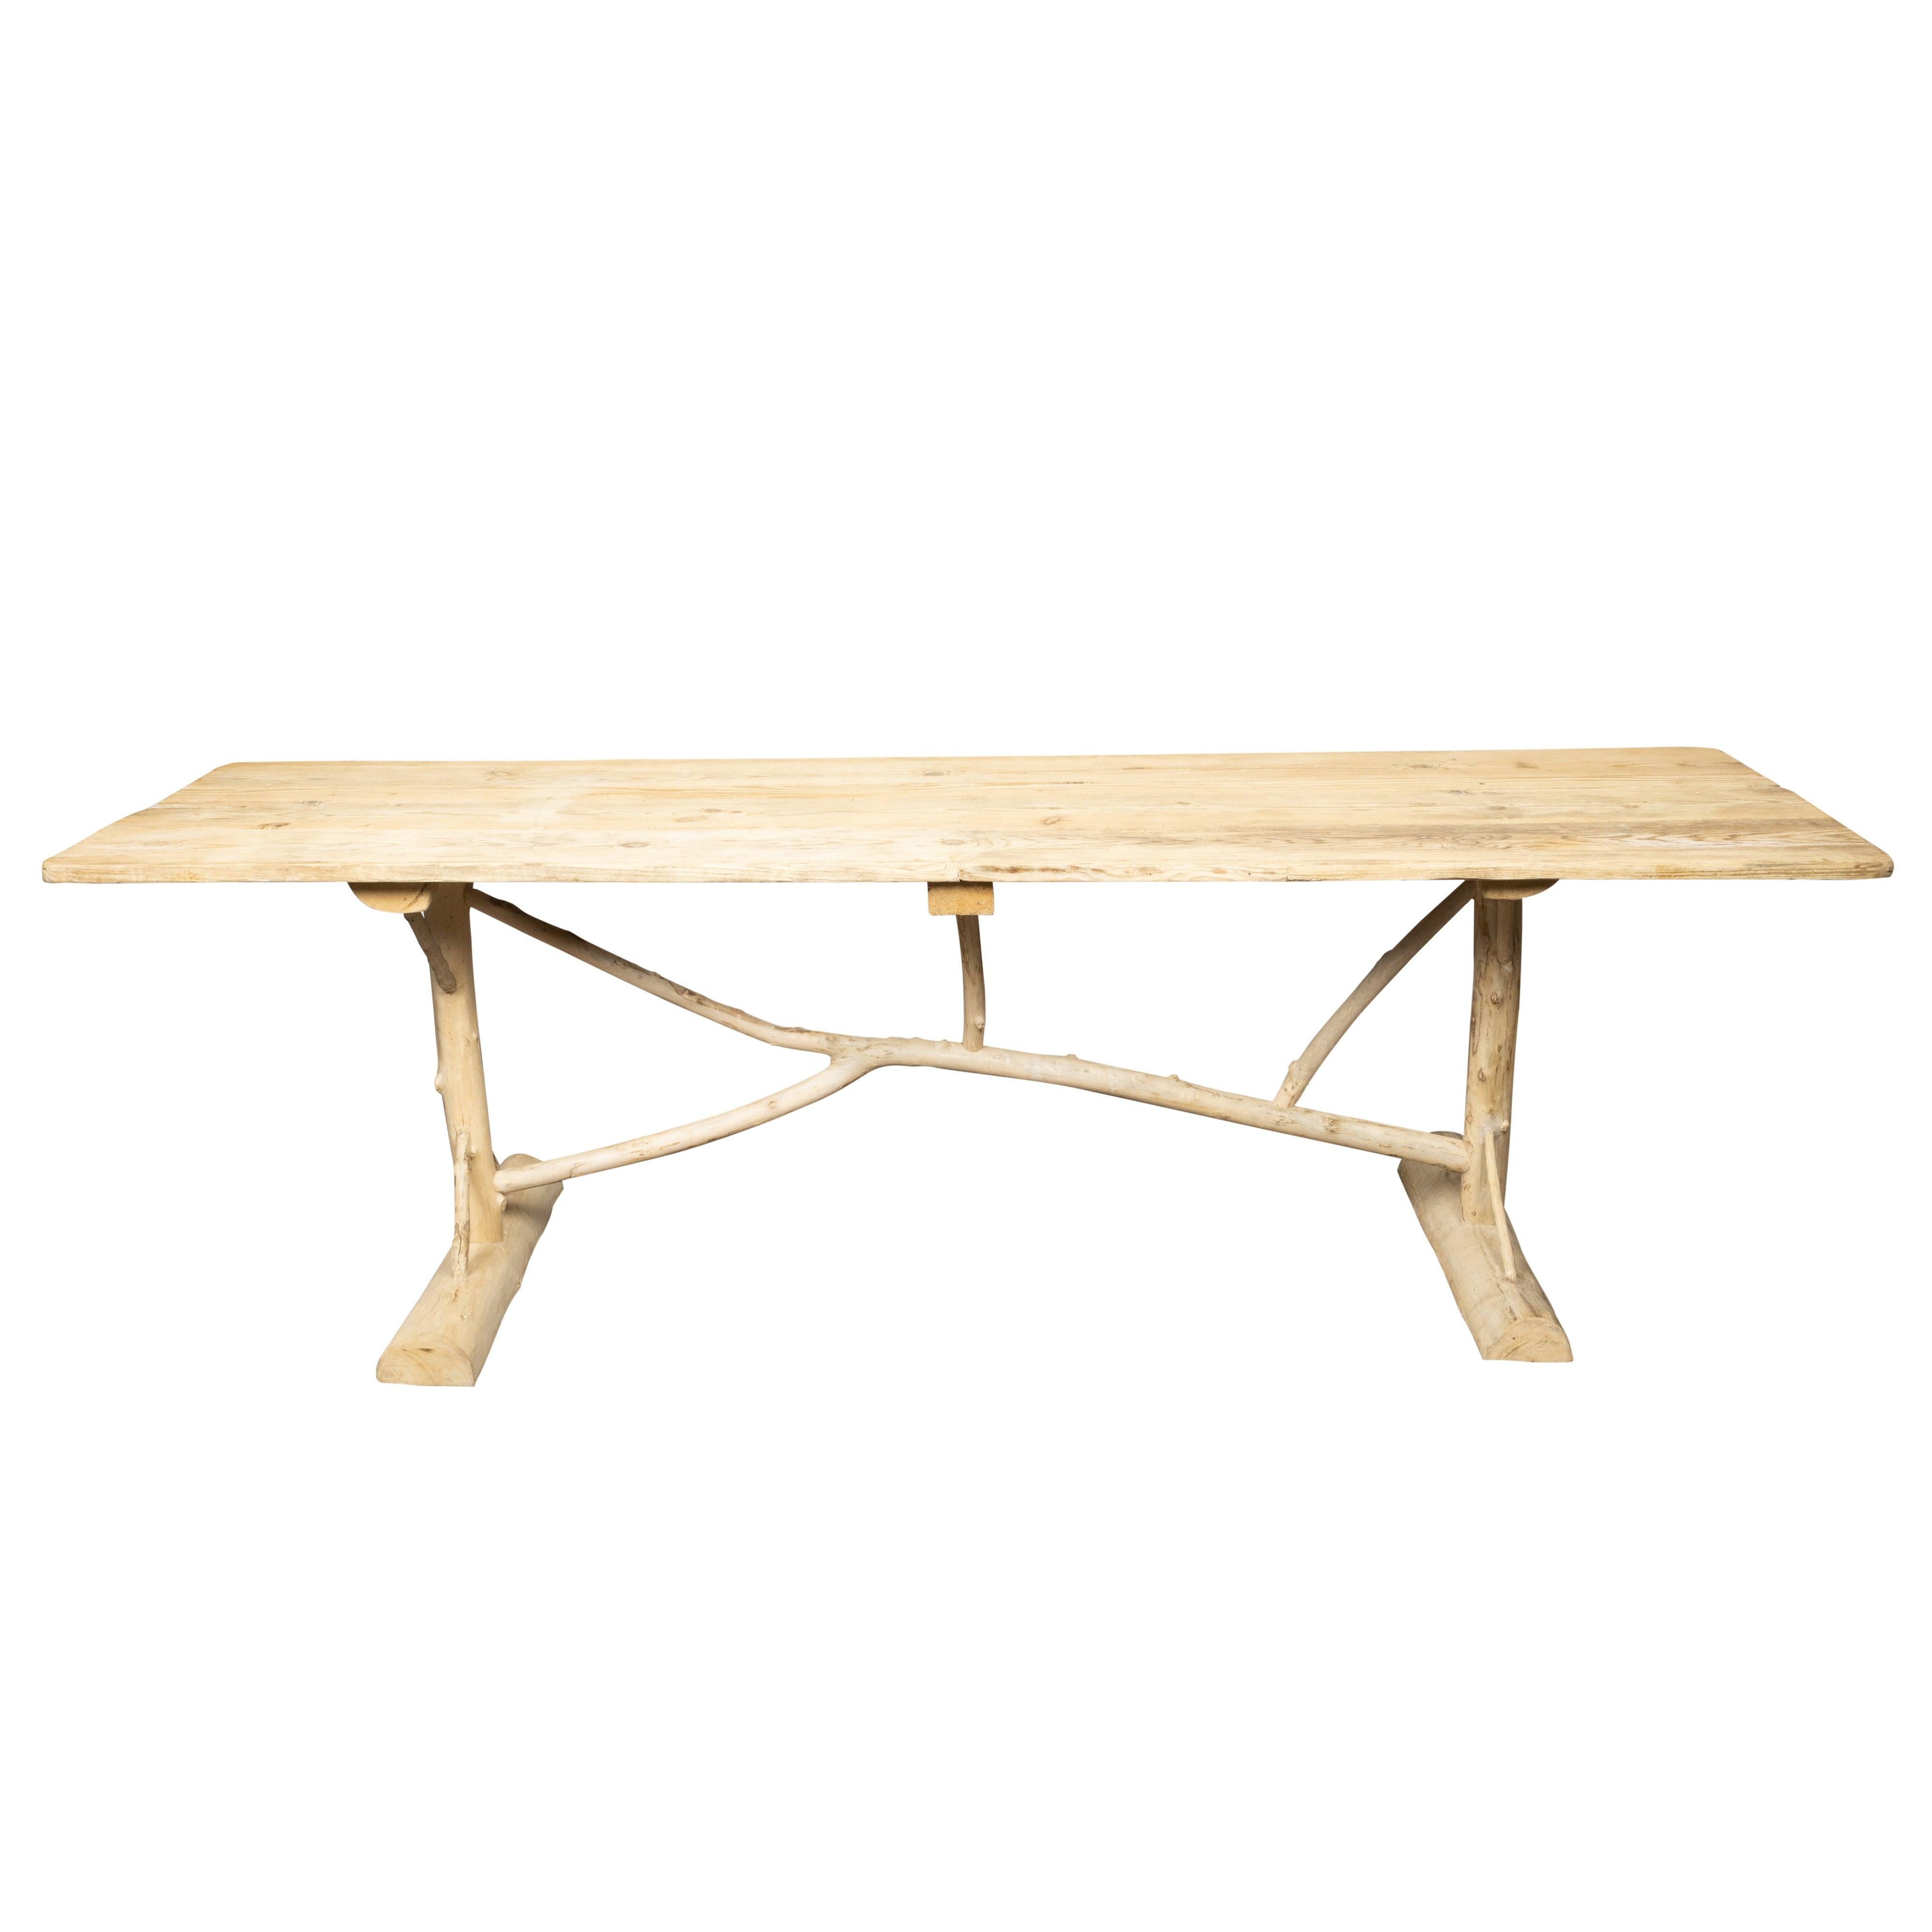 French Pine Farm Table with Twig Trestle Base from the Mid 20th Century